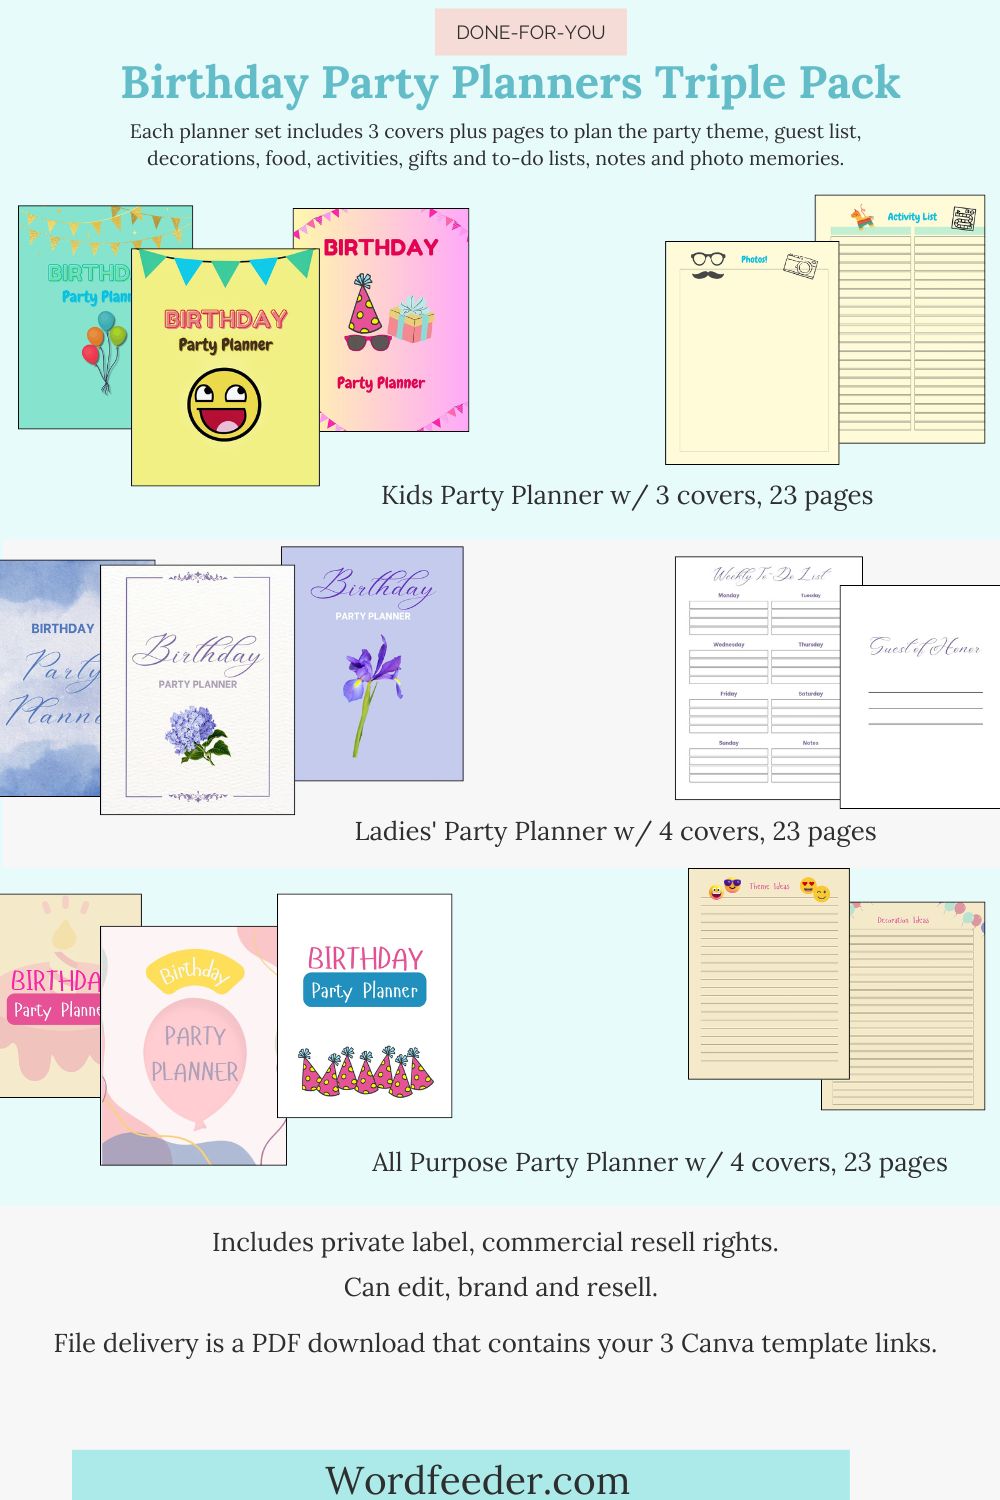 Birthday Party Planner Triple Pack. Each with 3 Covers and 23 Planner Pages